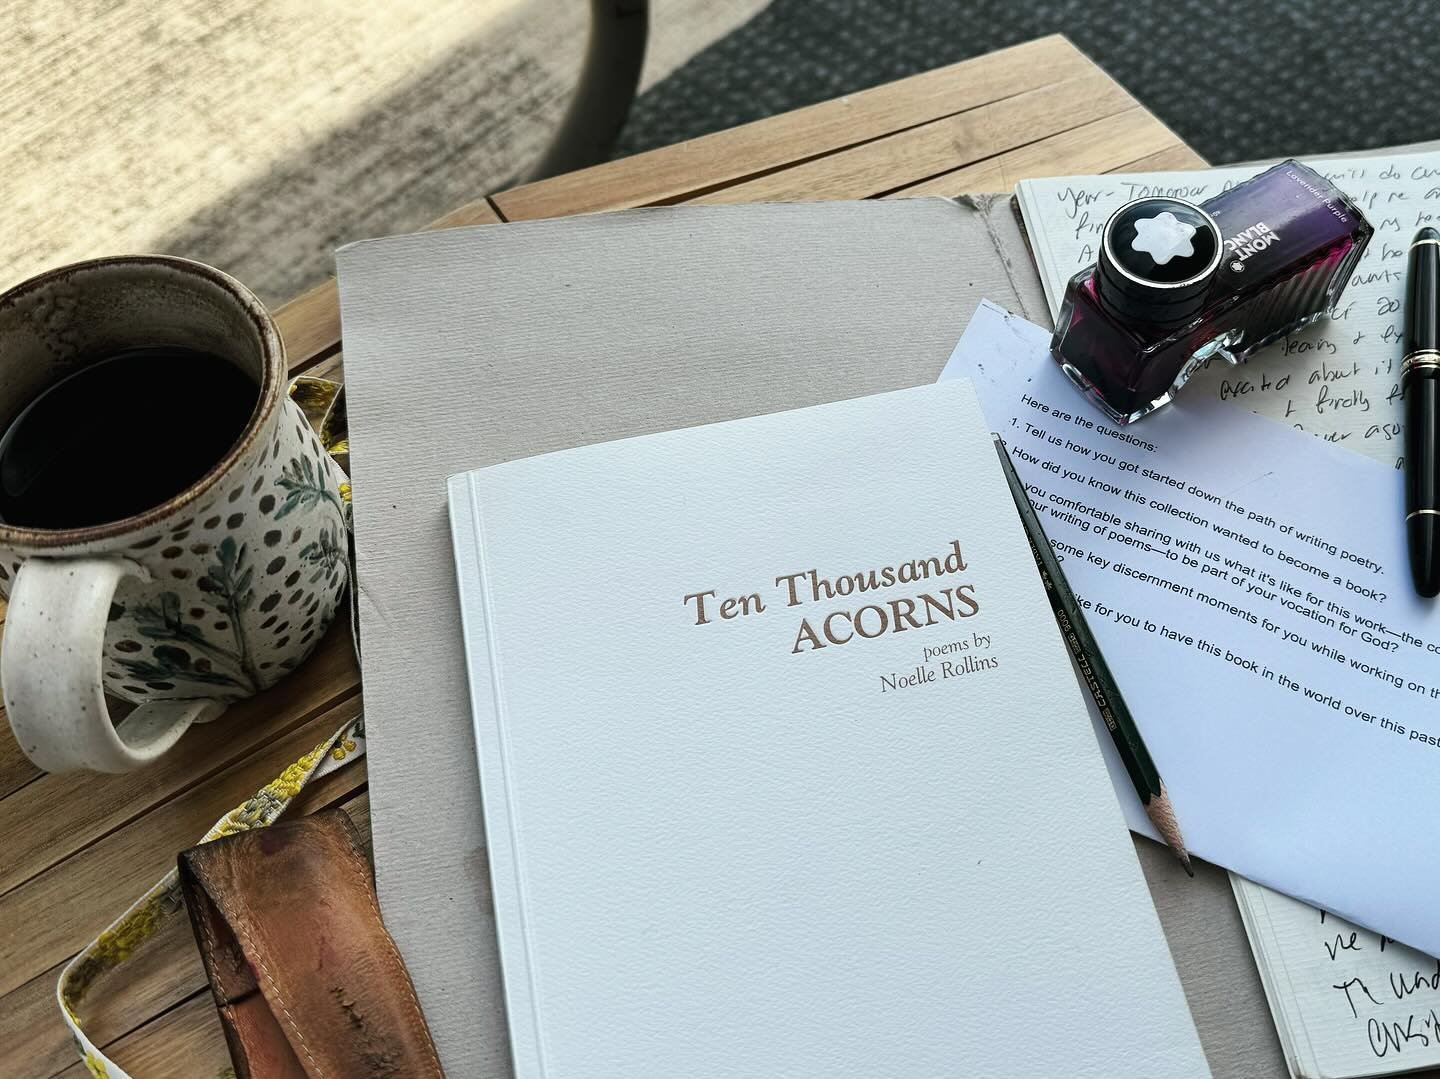 Preparing for a book launch party in my beloved Light House community tomorrow for my new book of poetry, &ldquo;Ten Thousand Acorns&rdquo;. 

 Do you have your copy yet? 

Hop over to my website to get yours. 

Link in bio. Or www.noellerollins.com
